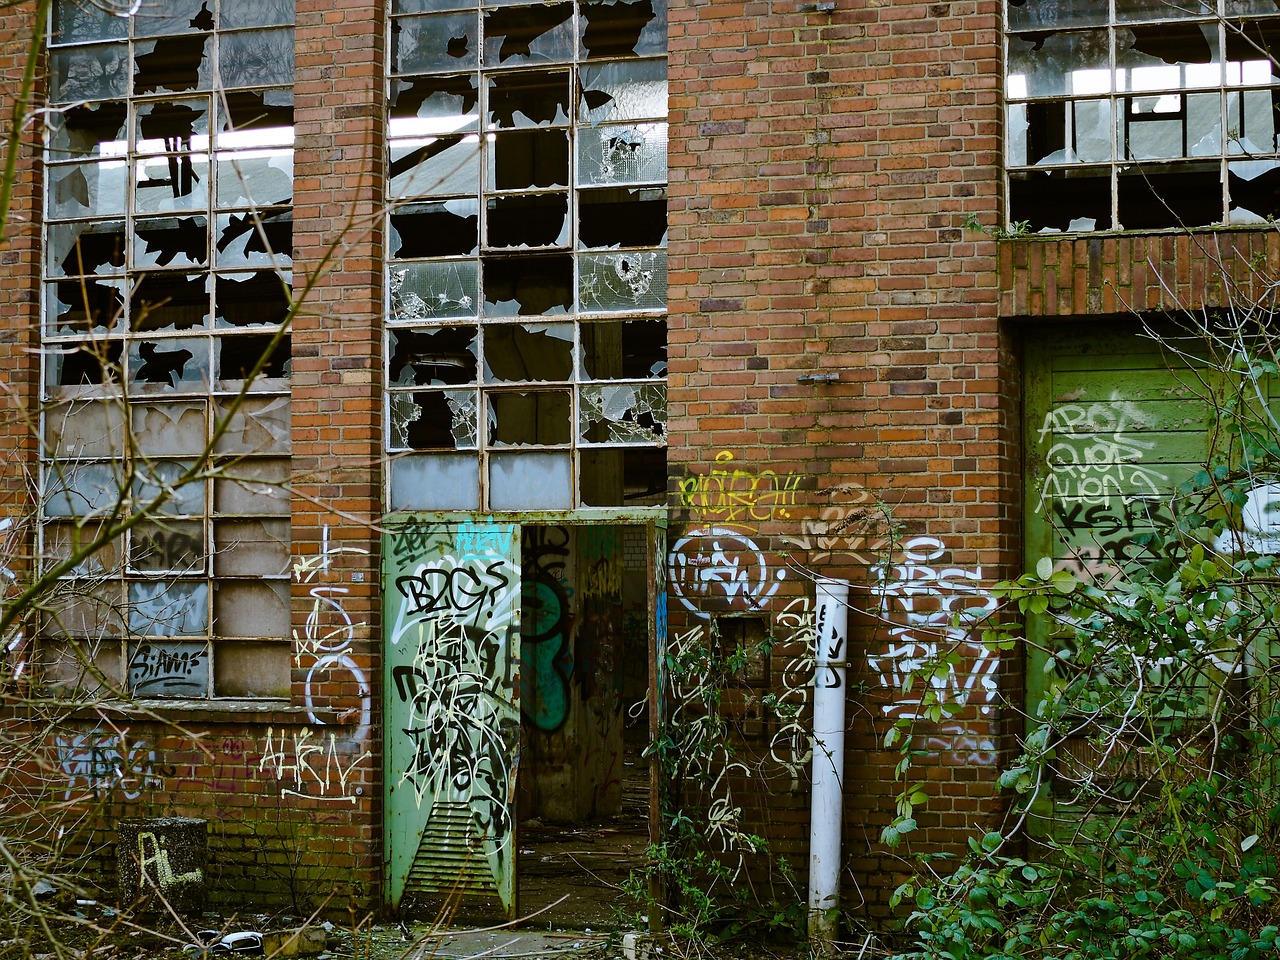 a building with broken windows and graffiti all over it, by Richard Carline, flickr, graffiti, 2 5 mm portra, factories and nature, elstree, many doorways